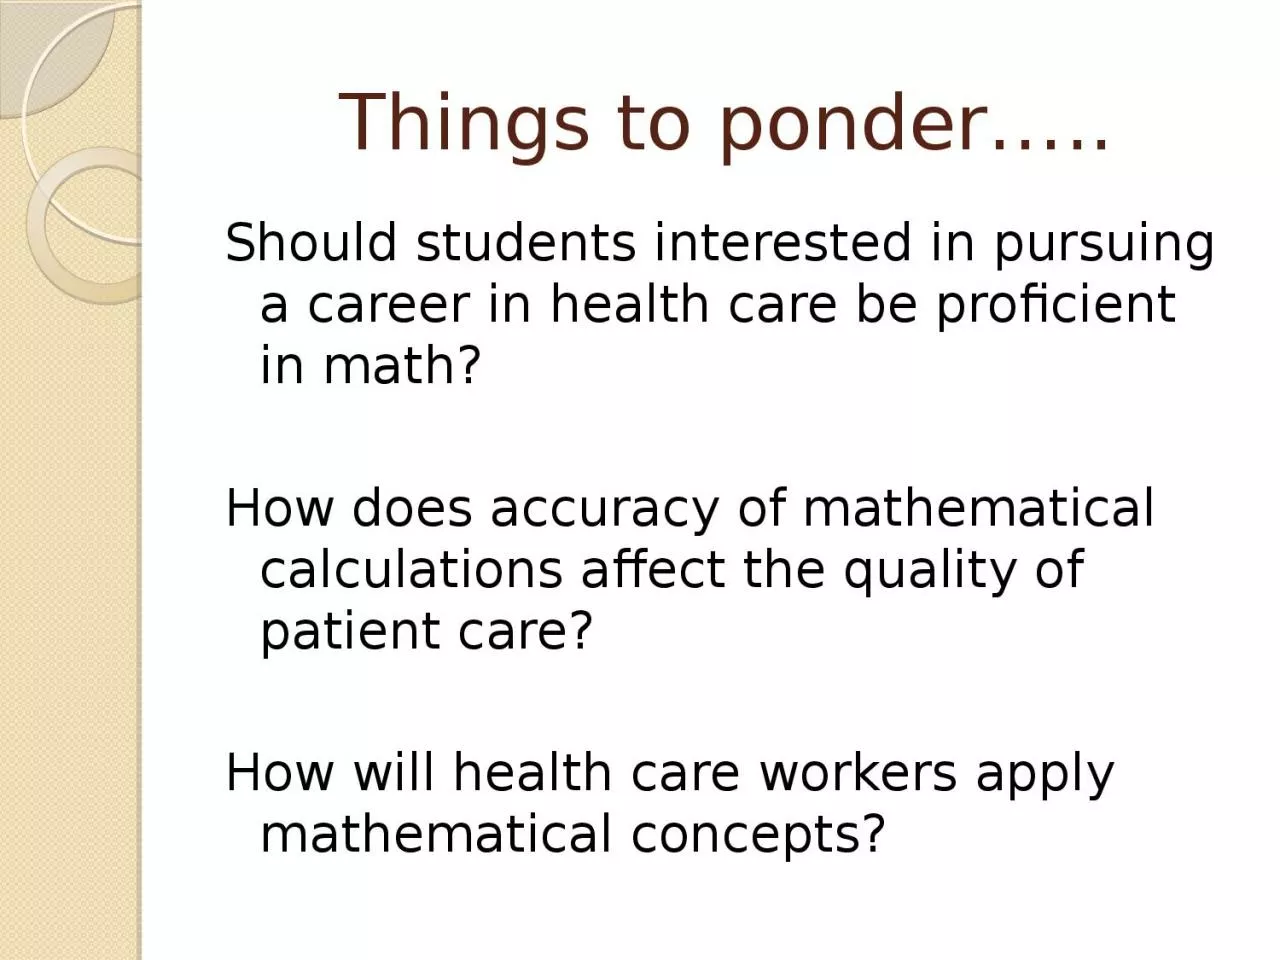 Things to ponder….. Should students interested in pursuing a career in health care be